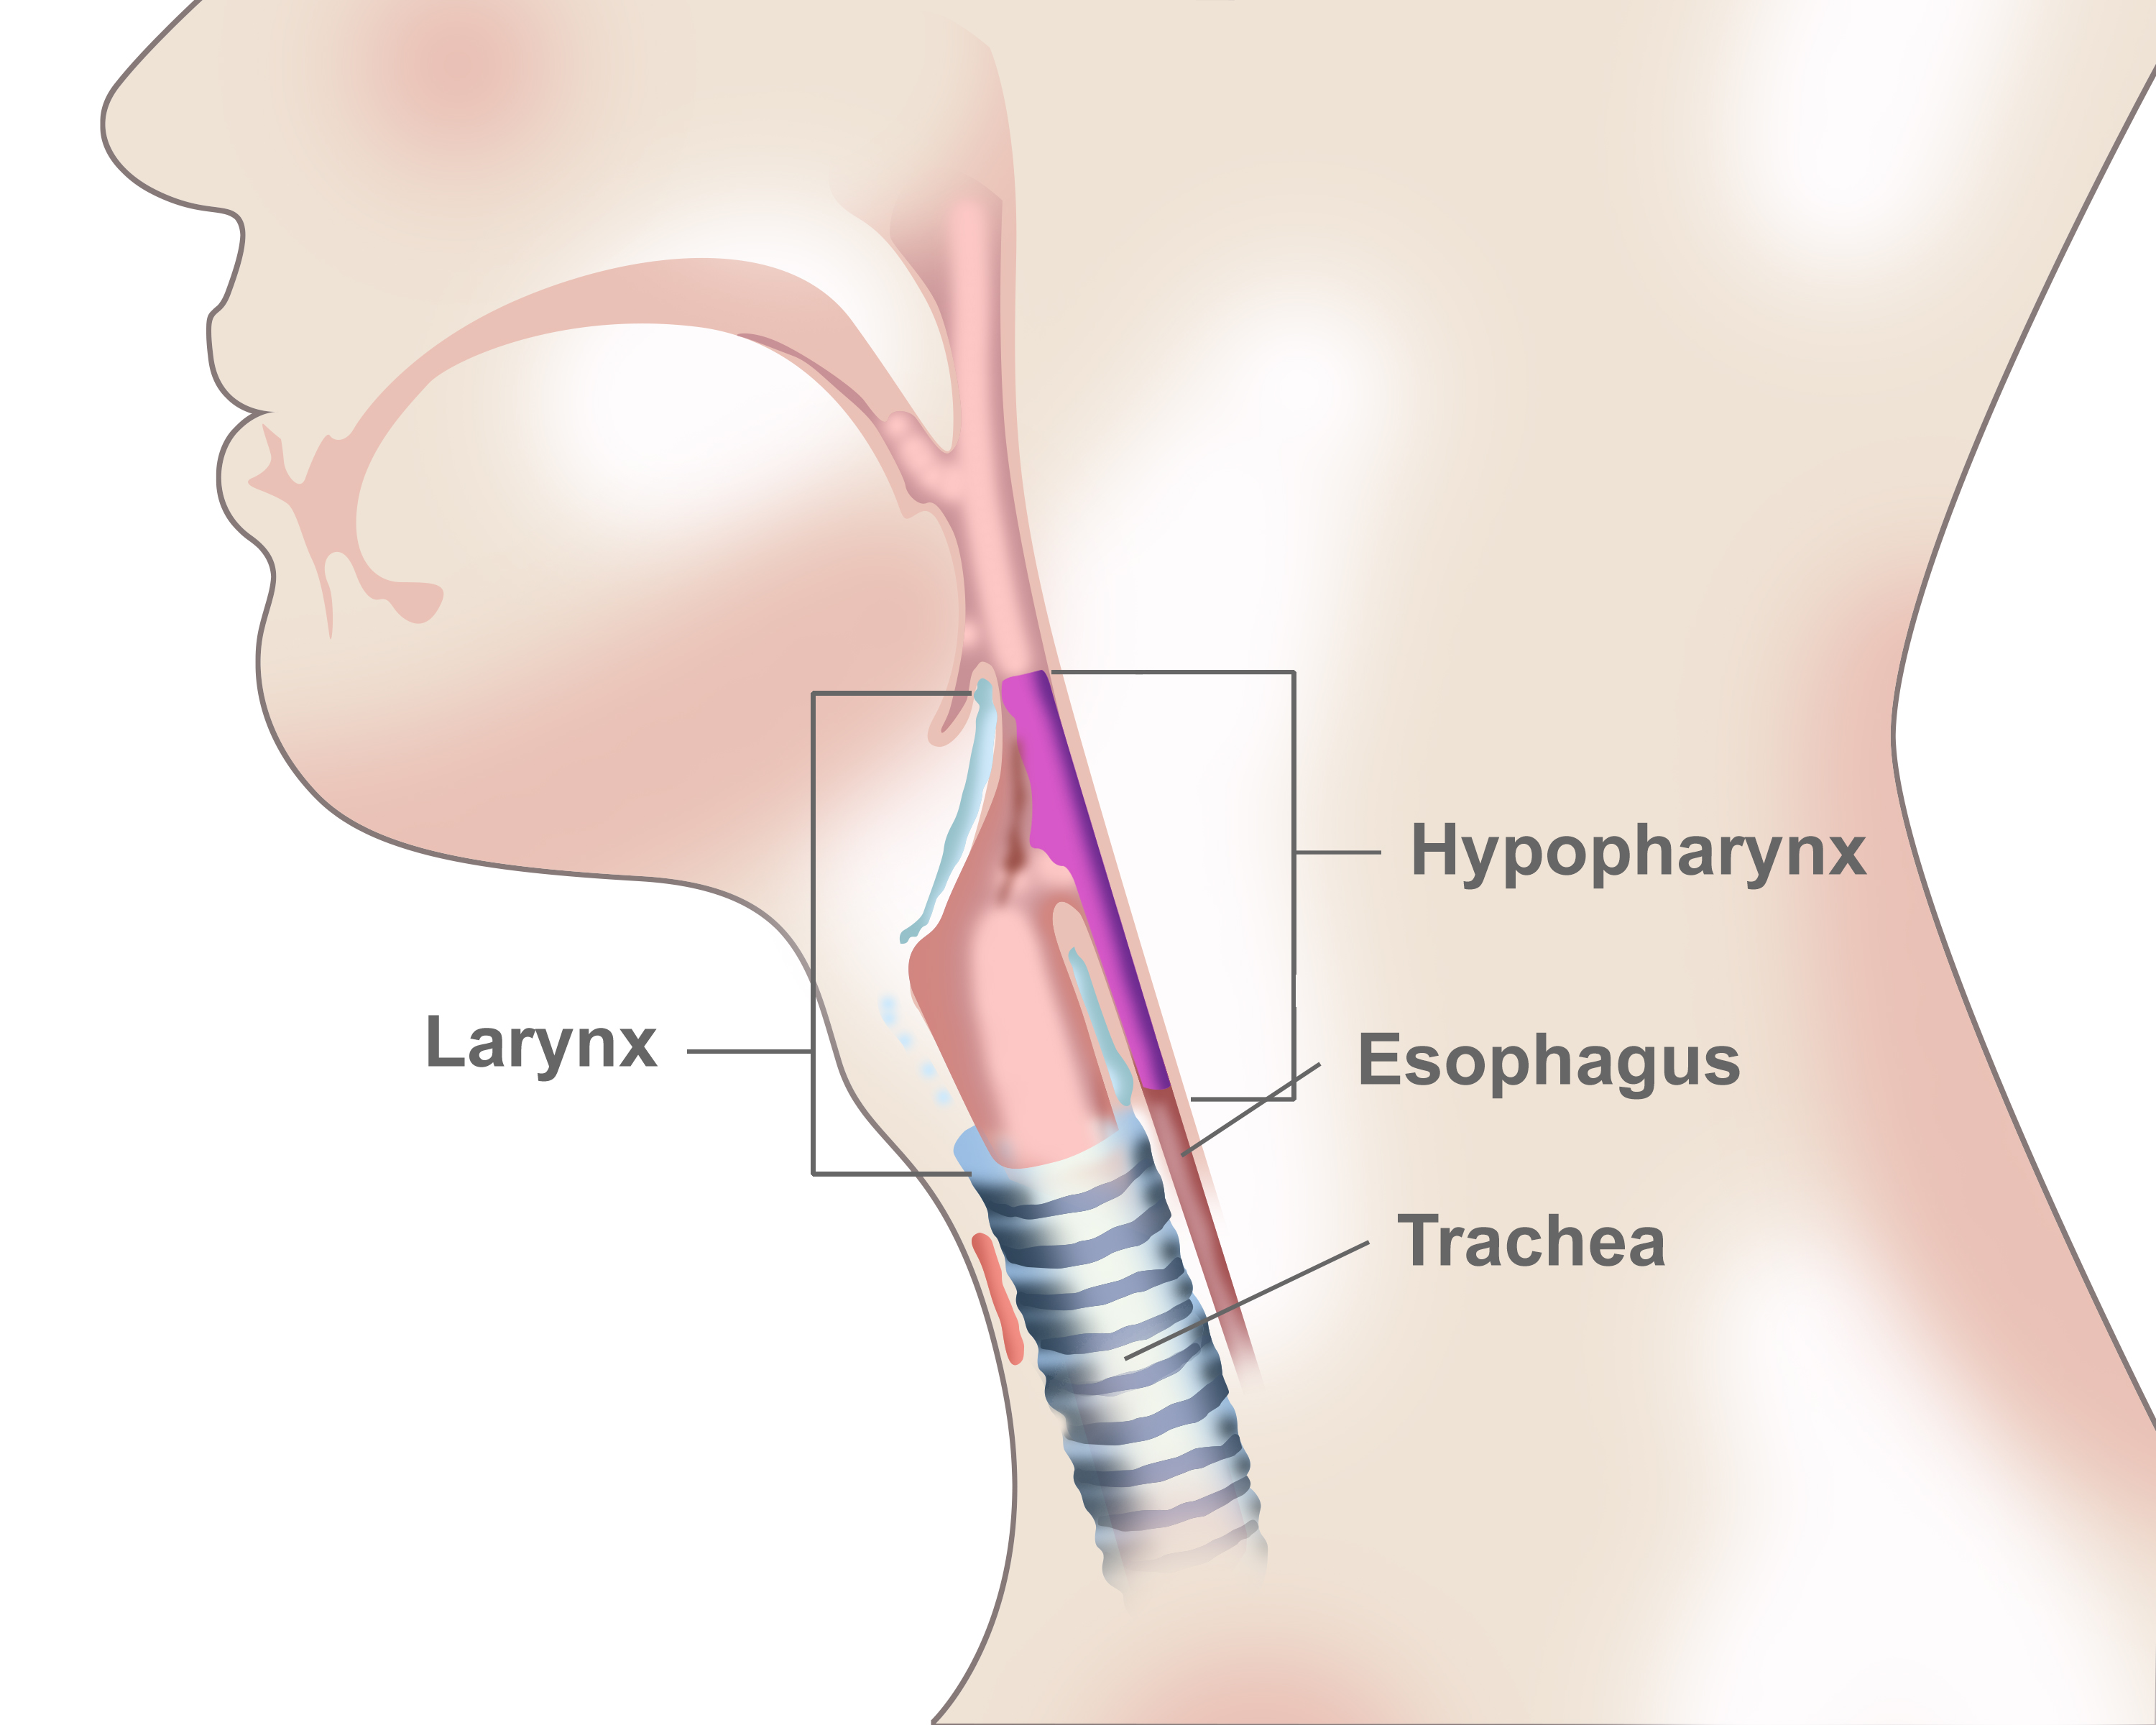 Squamous papilloma hypopharynx Smoking and hpv head and neck cancer